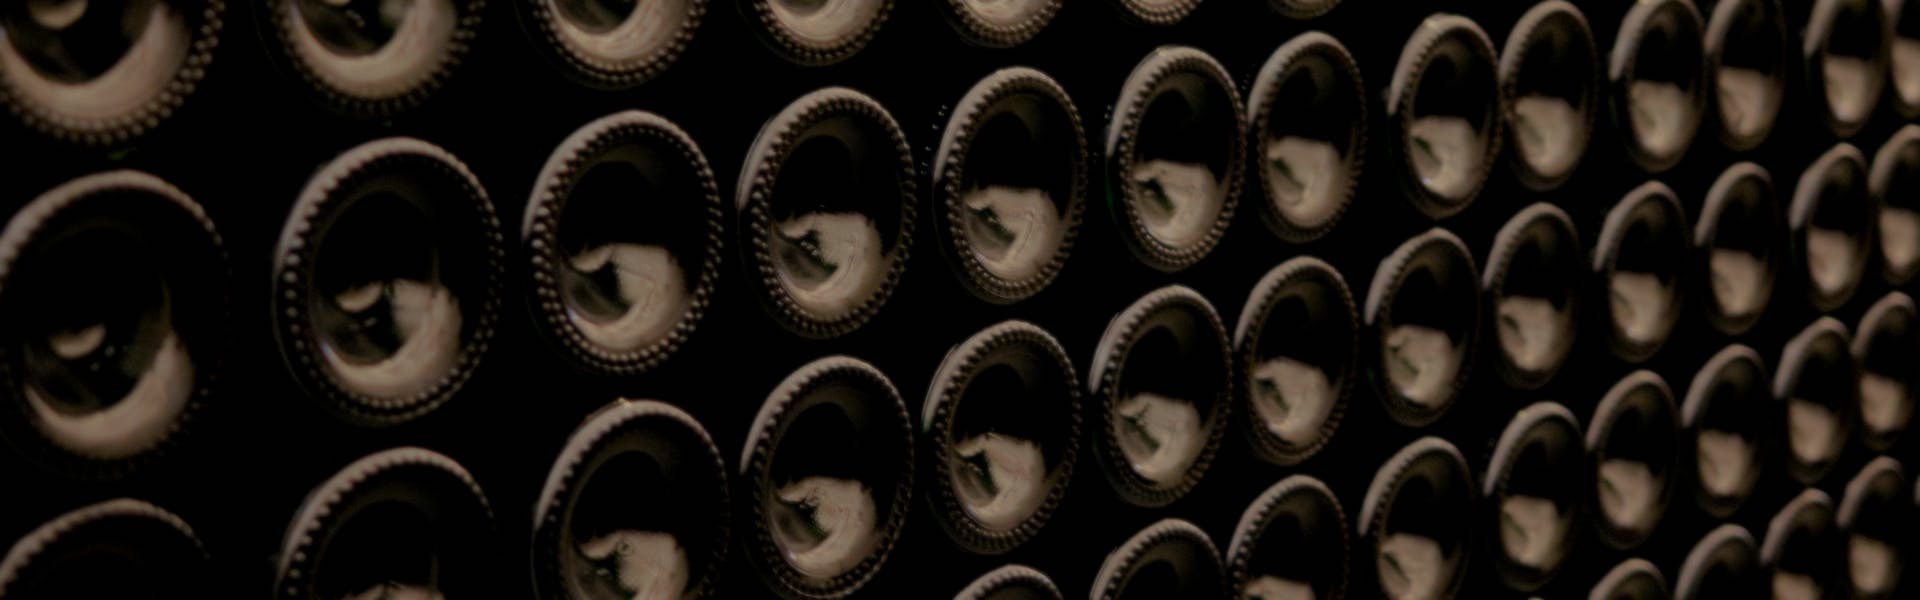 Filling the cellar with selected wine bottles.